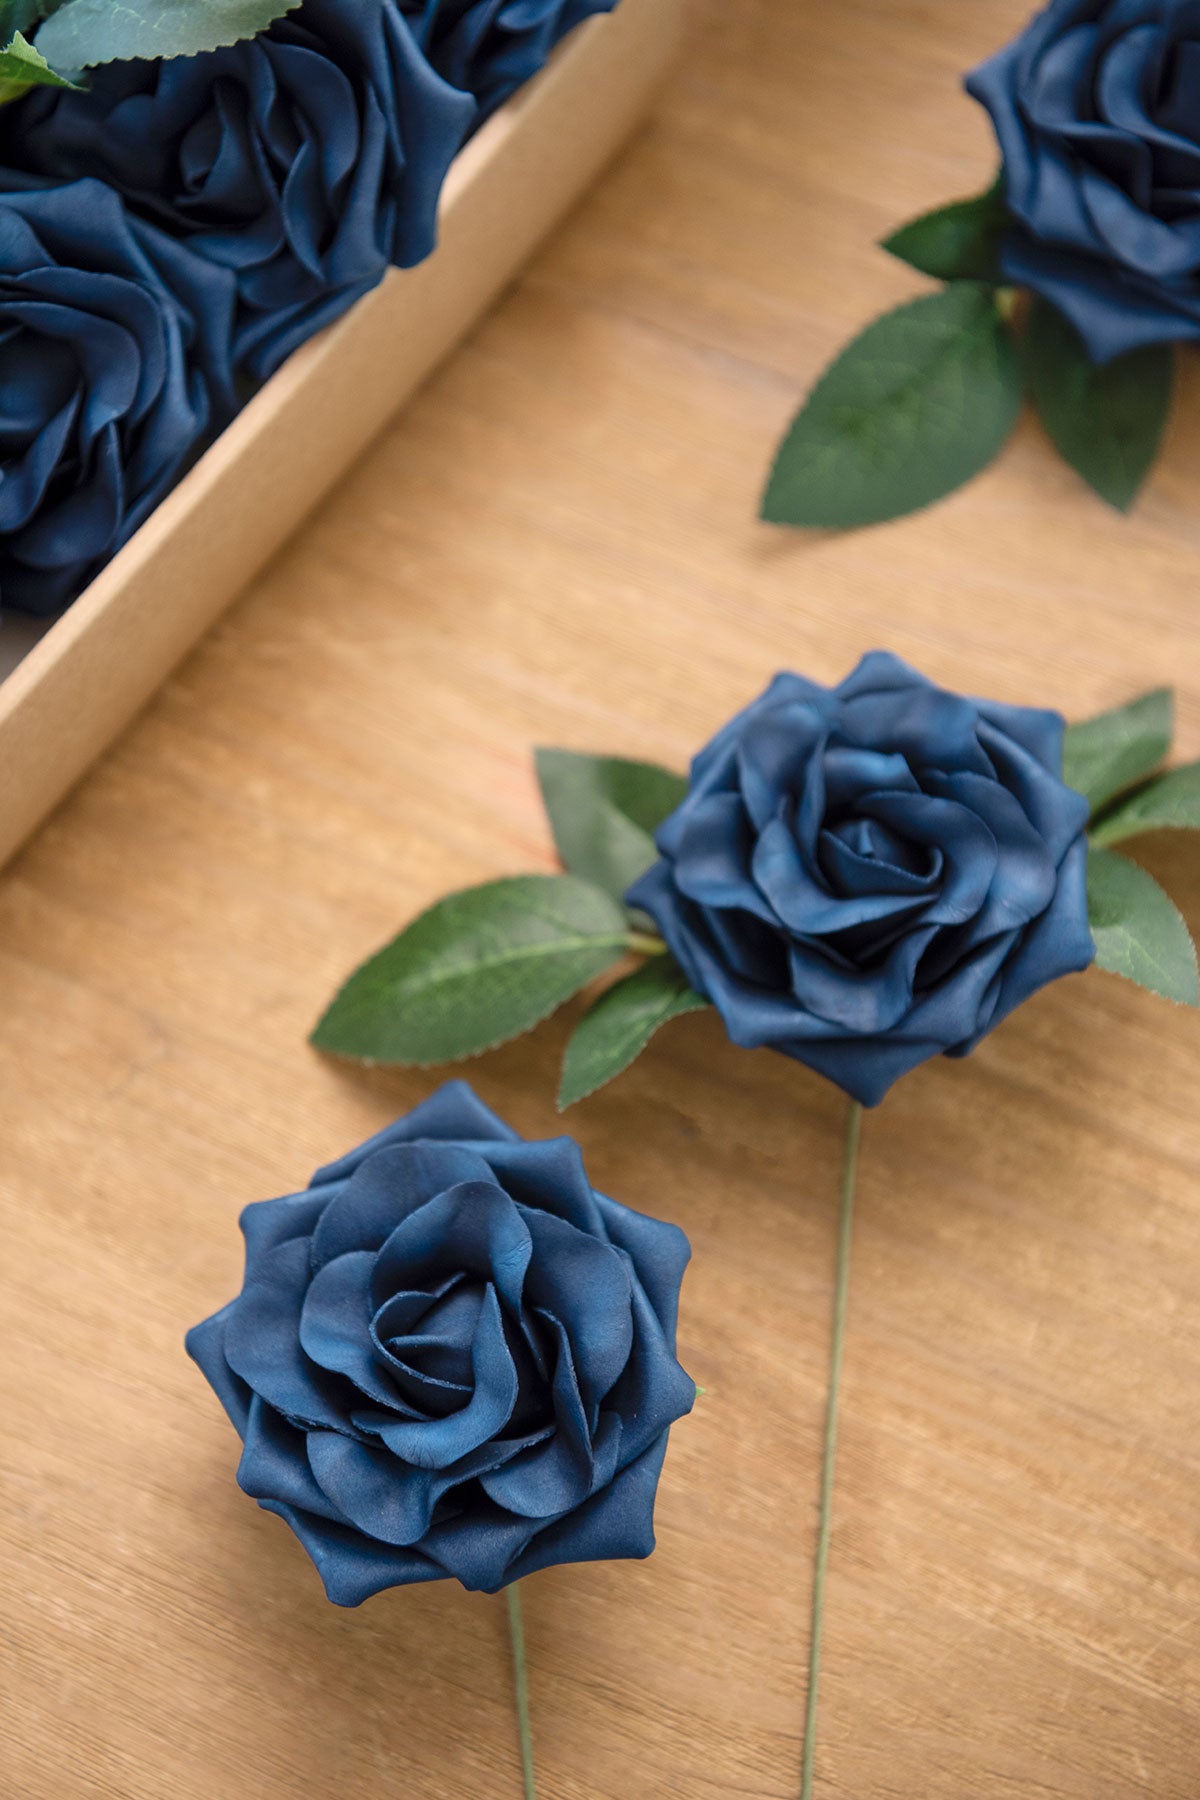 3.5" Foam Avalanche Rose with Stem - 7 Colors